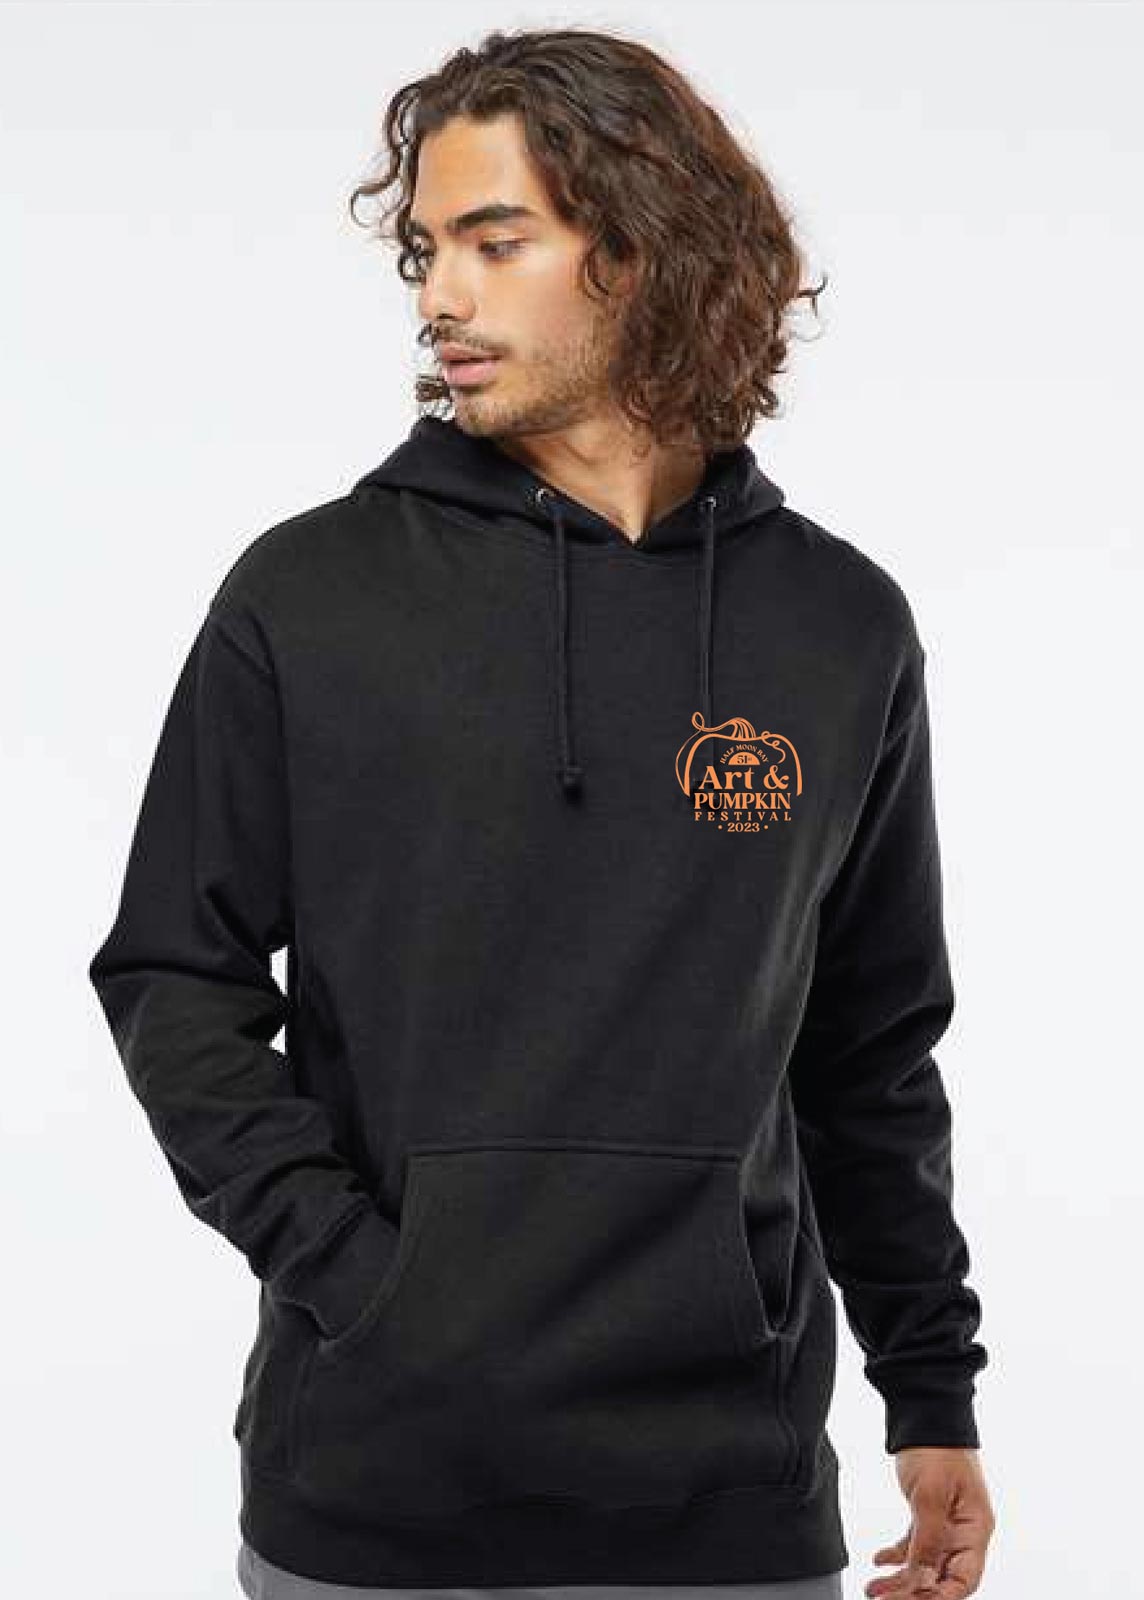 Pullover hoodie in black - front